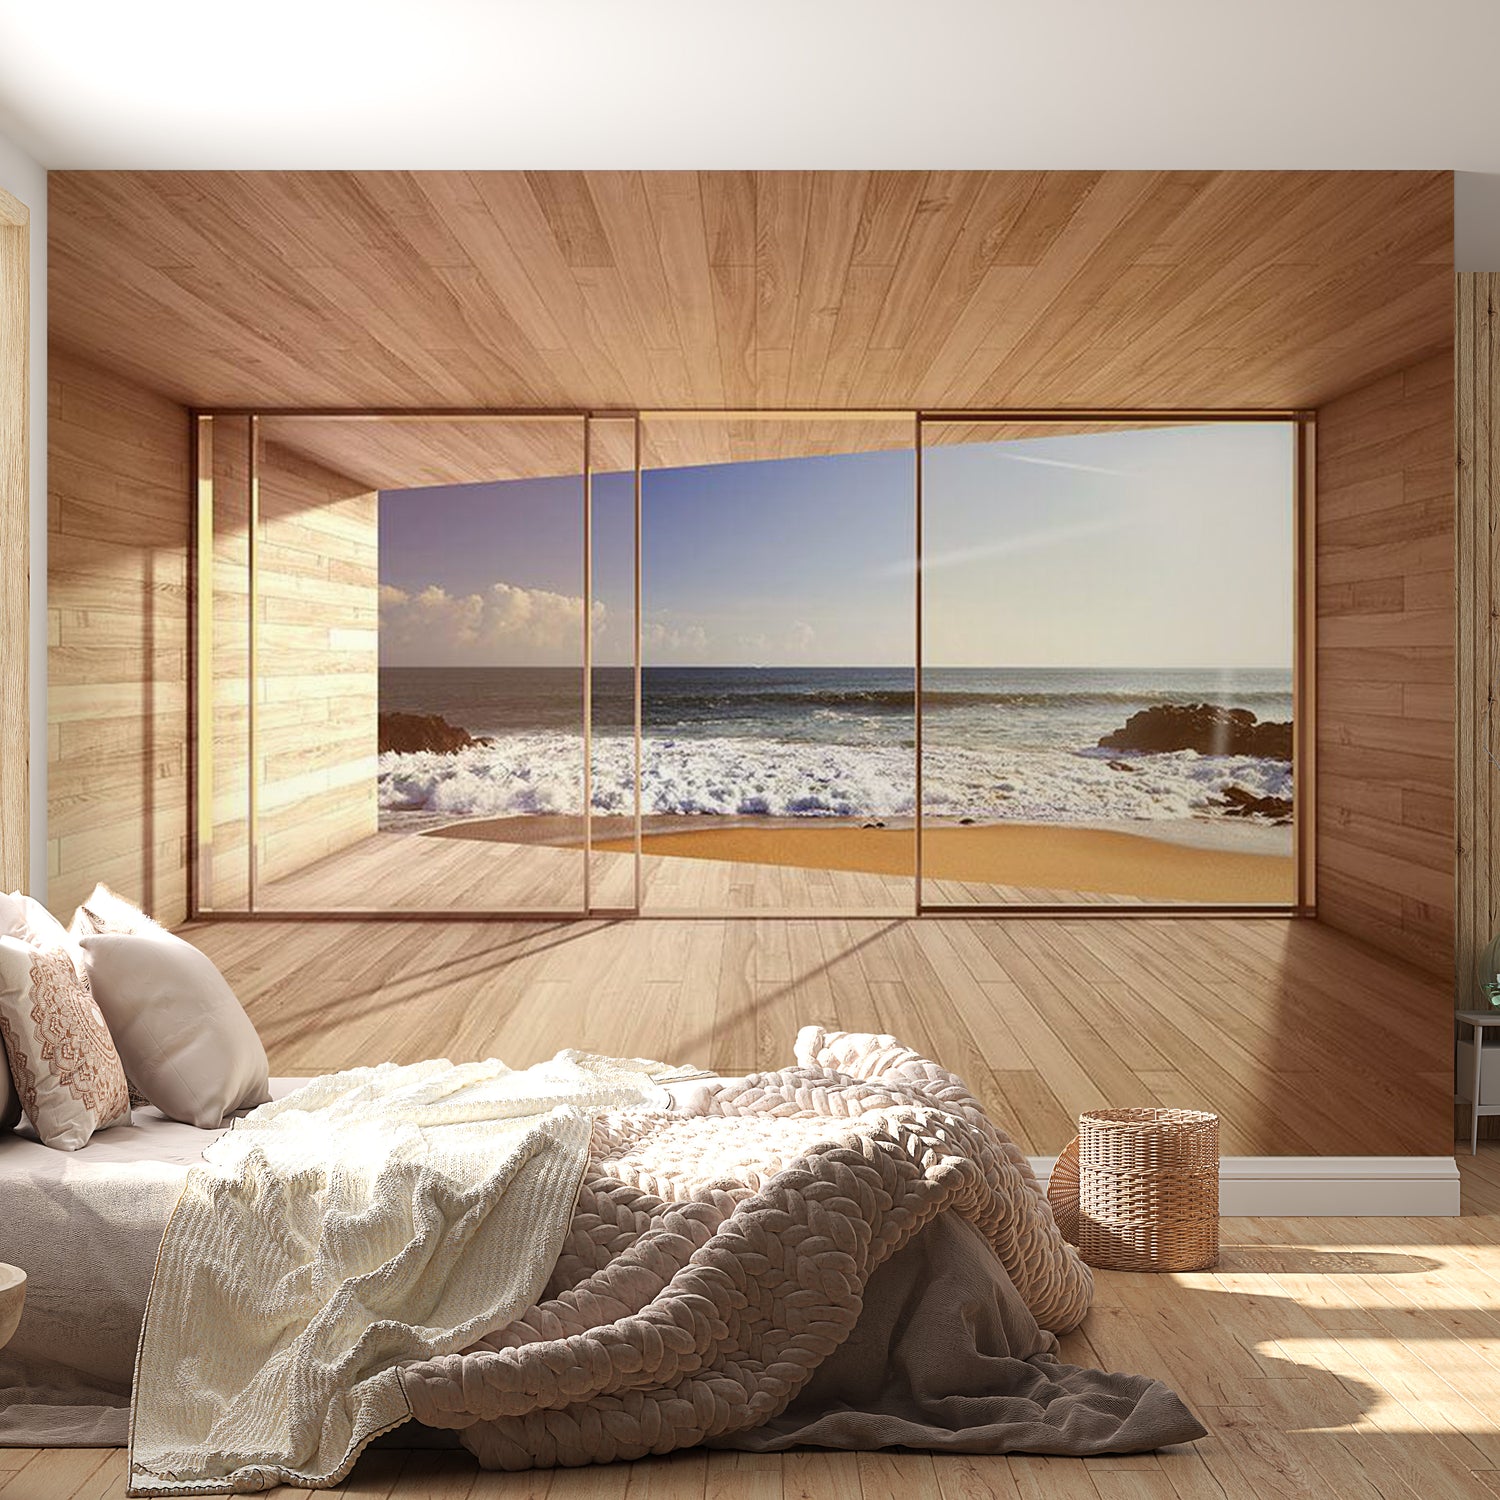 Peel & Stick Beach Wall Mural - Dream View - Removable Wall Decals